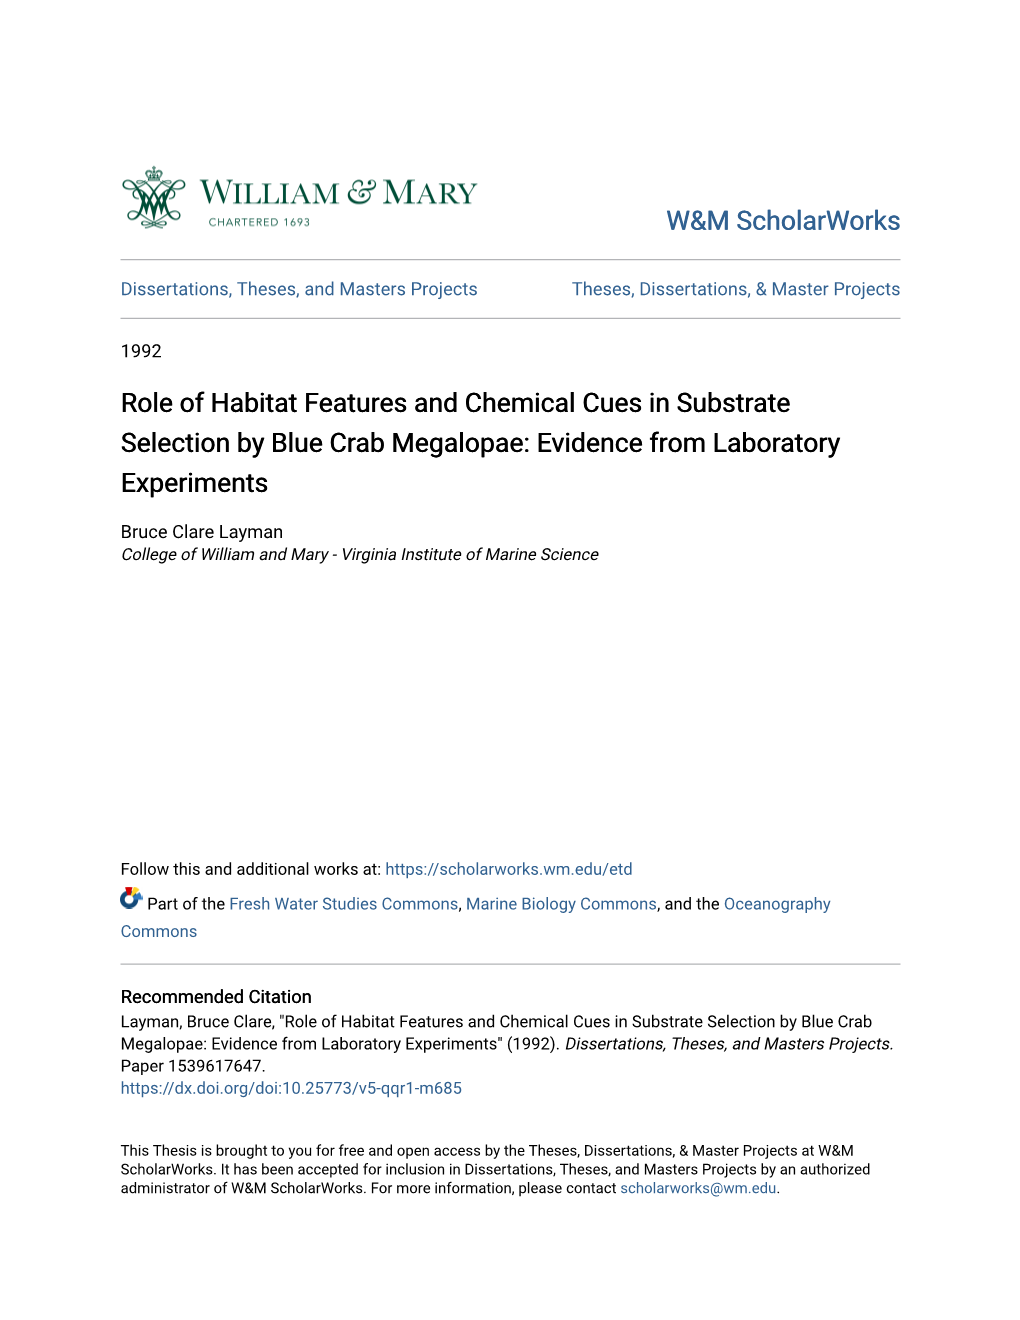 Role of Habitat Features and Chemical Cues in Substrate Selection by Blue Crab Megalopae: Evidence from Laboratory Experiments